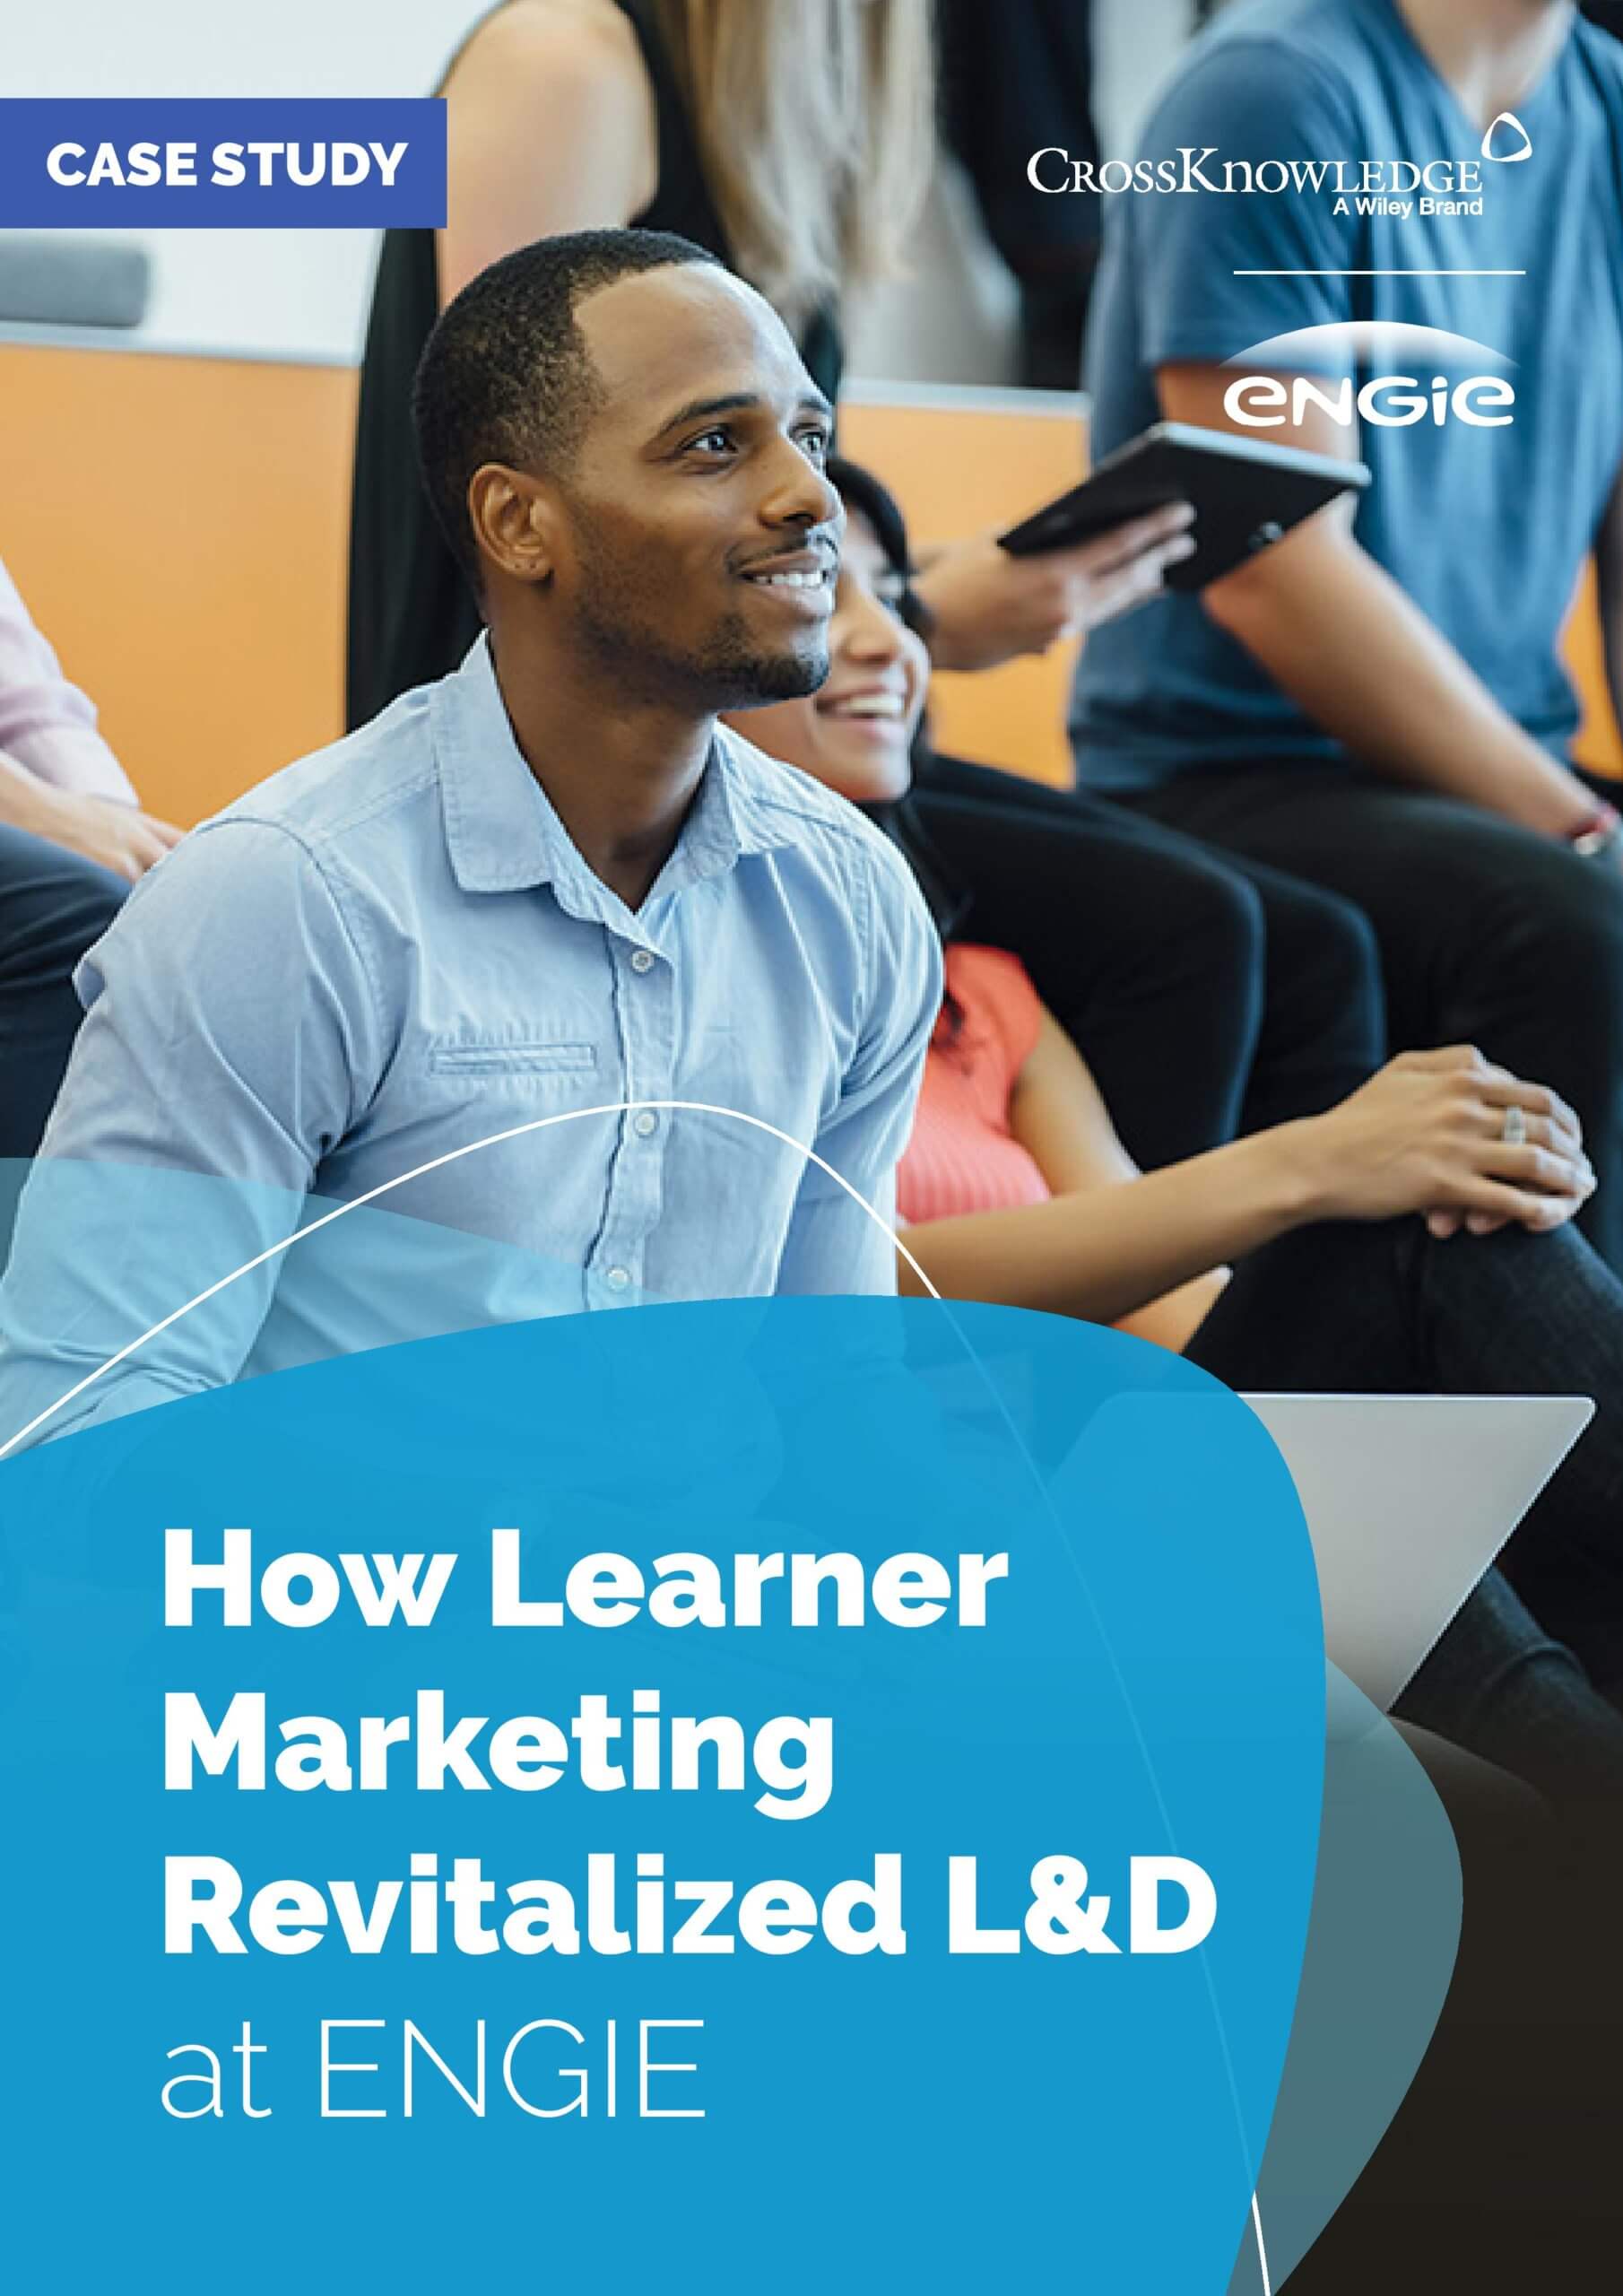 CrossKnowledge – How Learner Marketing Revitalized L&D at ENGIE